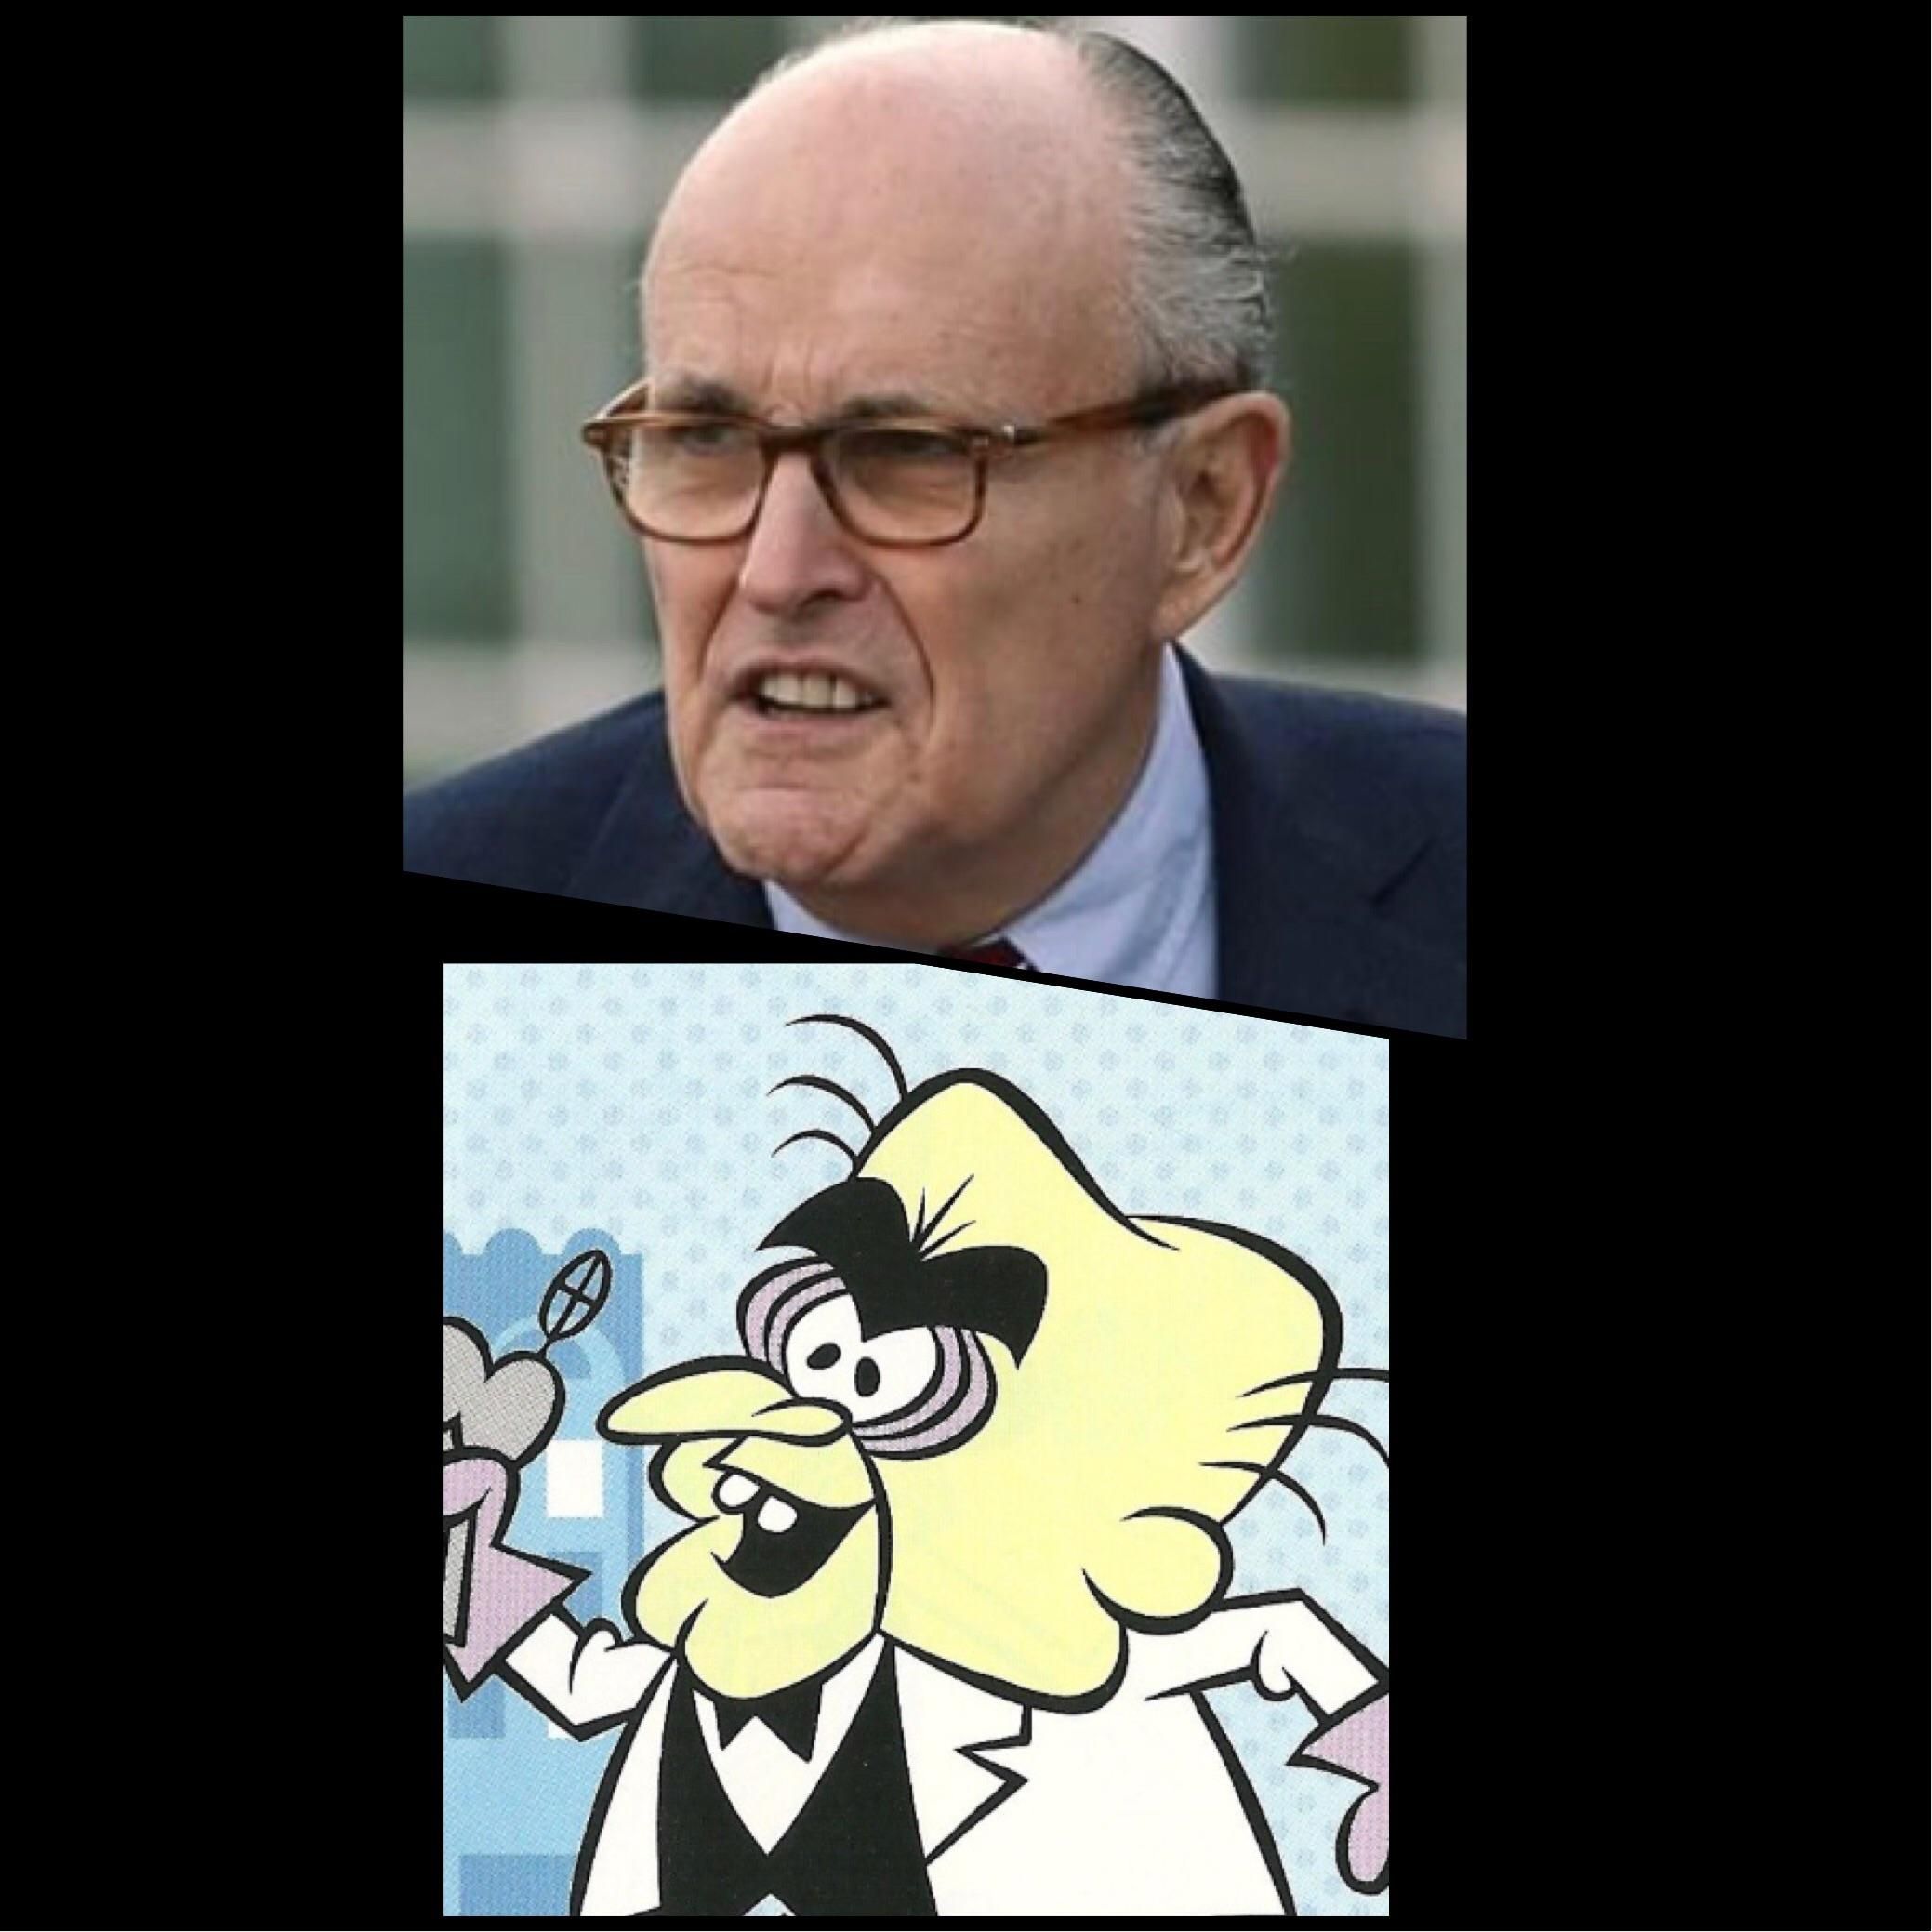 Underdog was my favorite cartoon as a kid. I’ve always thought that Rudy resembles Simon Bar Sinister.